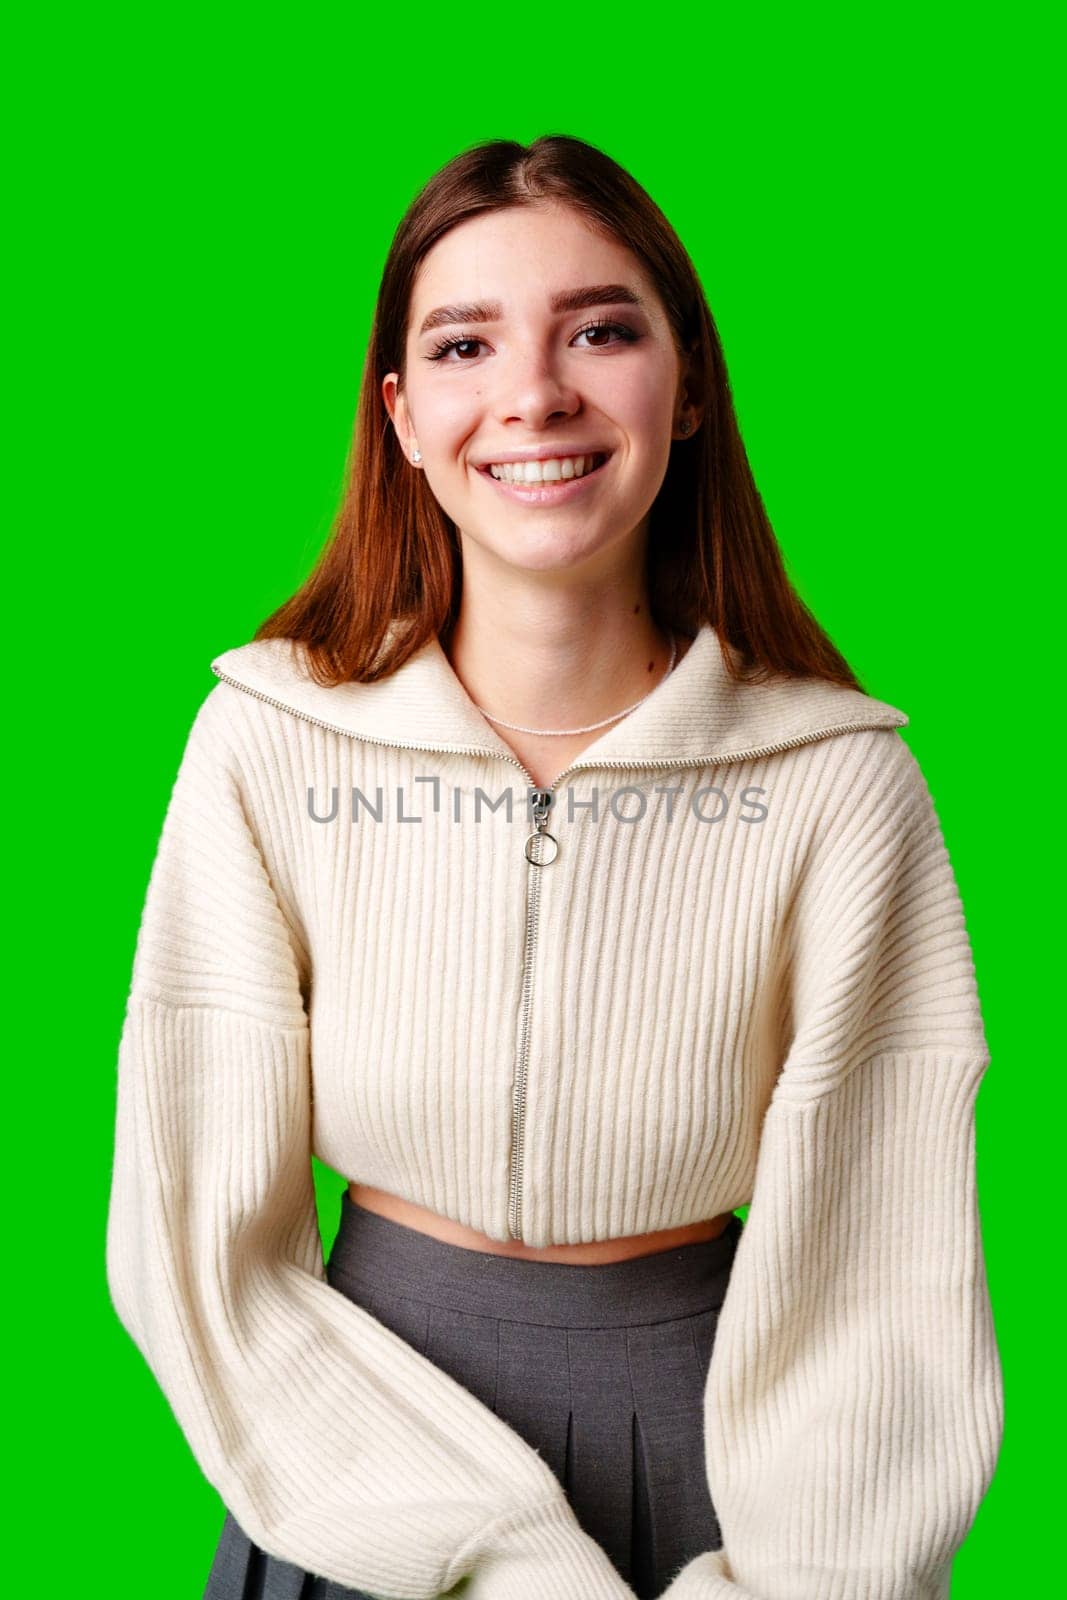 Smiling Young Woman in Casual Attire Against Bright Green Background by Fabrikasimf